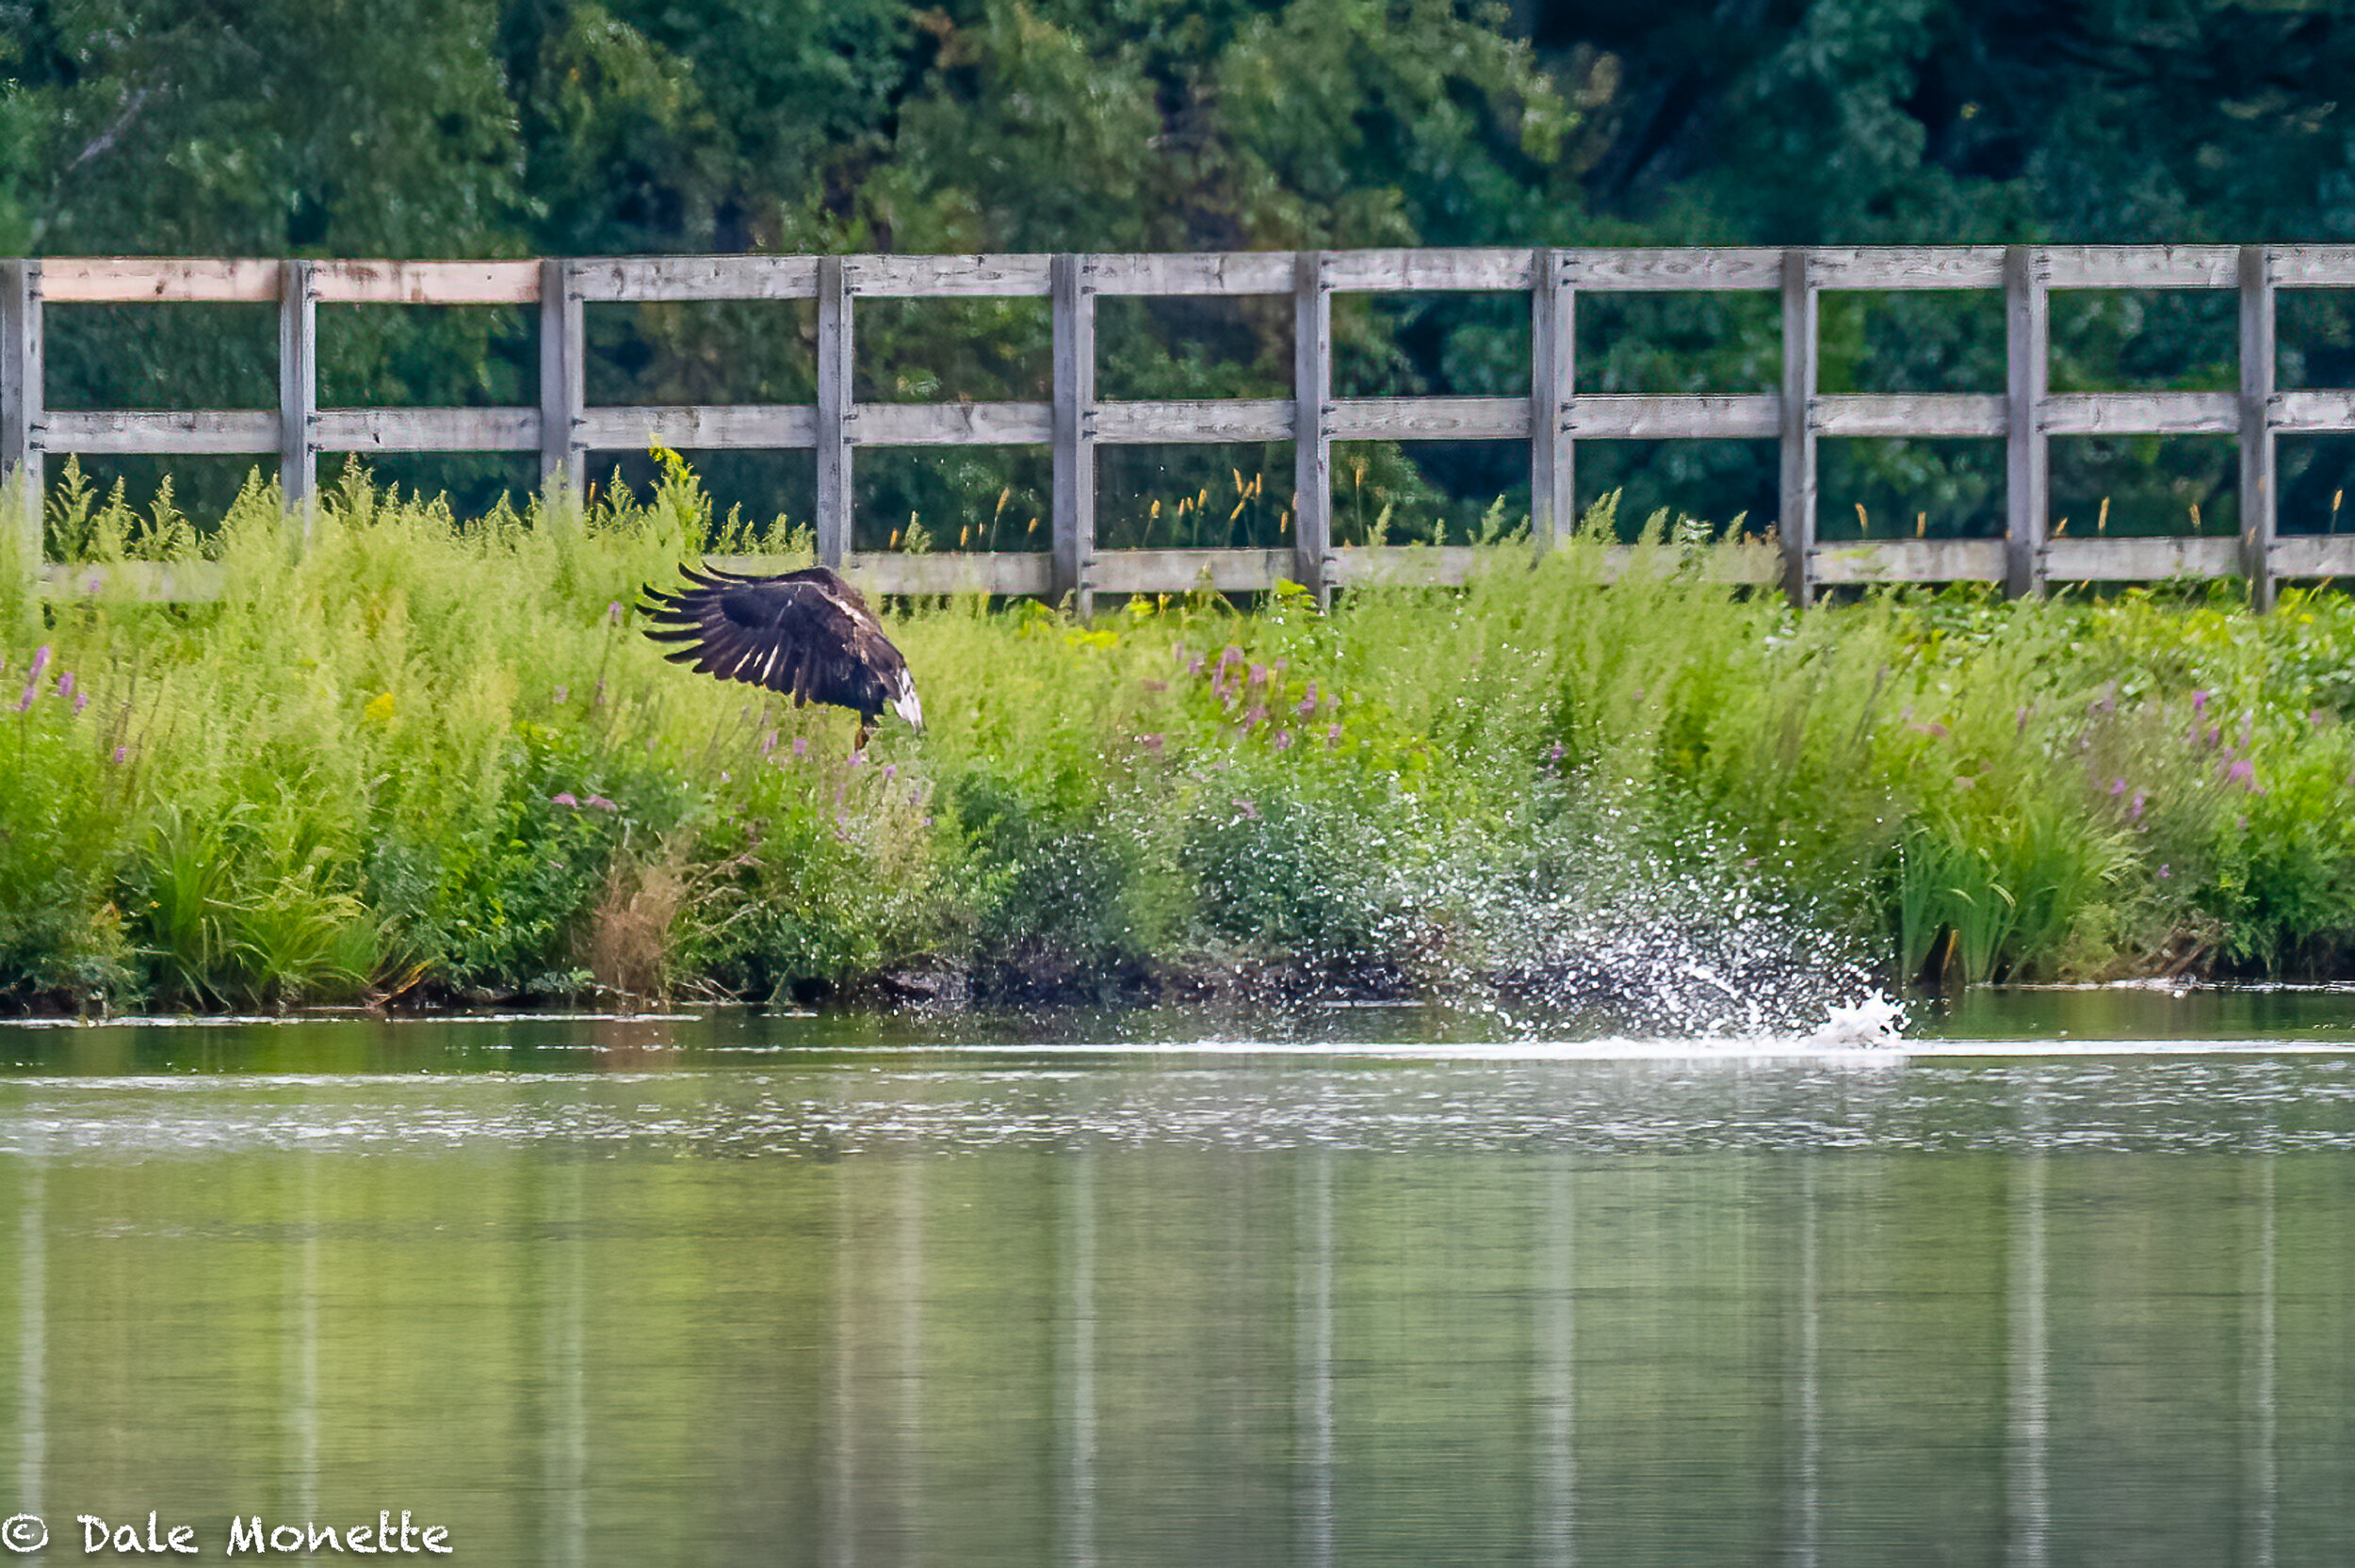   After being cooped up for 3 weeks after going thru back surgery I am finally sprung from the house and can drive. Todays adventure was seeing this juvenile bald eagle pull a fish out of the water in Turners Falls, MA…..  its onward and upward for m